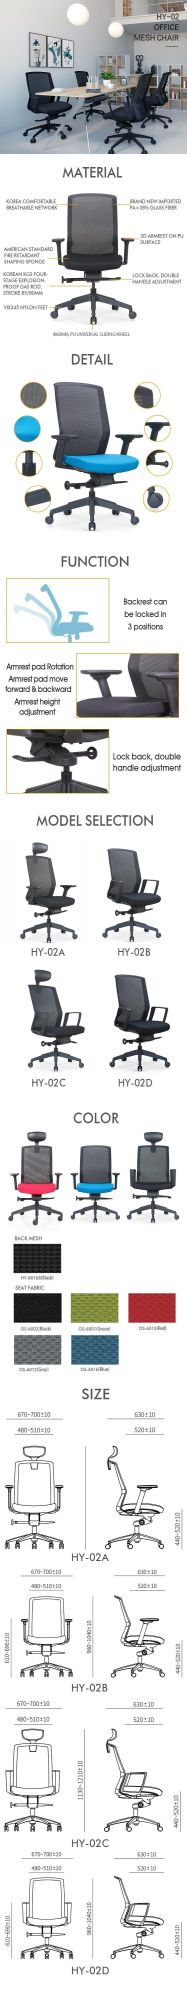 Environmental and Fire Protection Office Chair